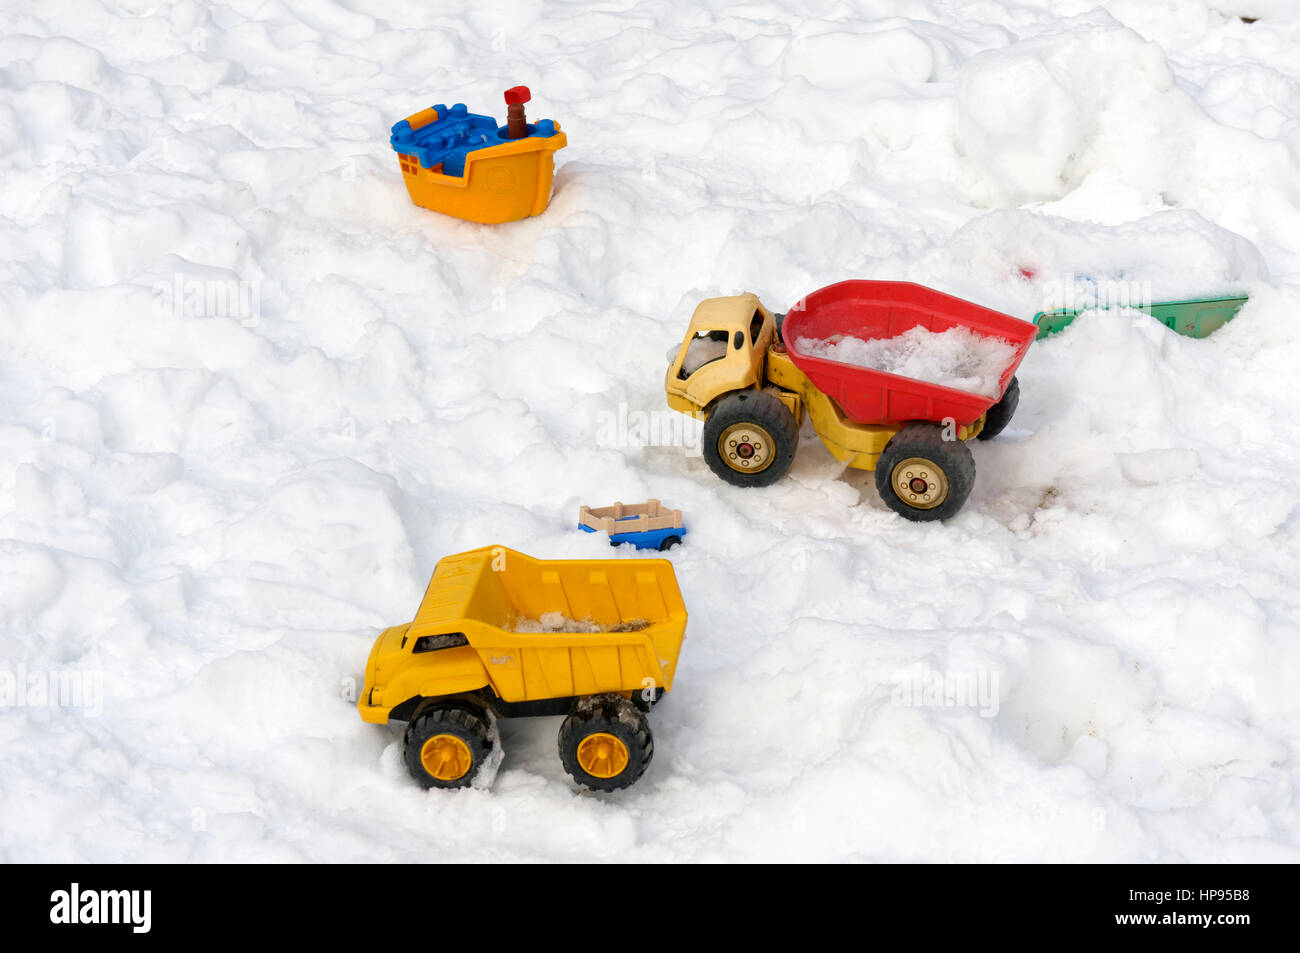 Children's plastic toys abandoned in the snow Stock Photo